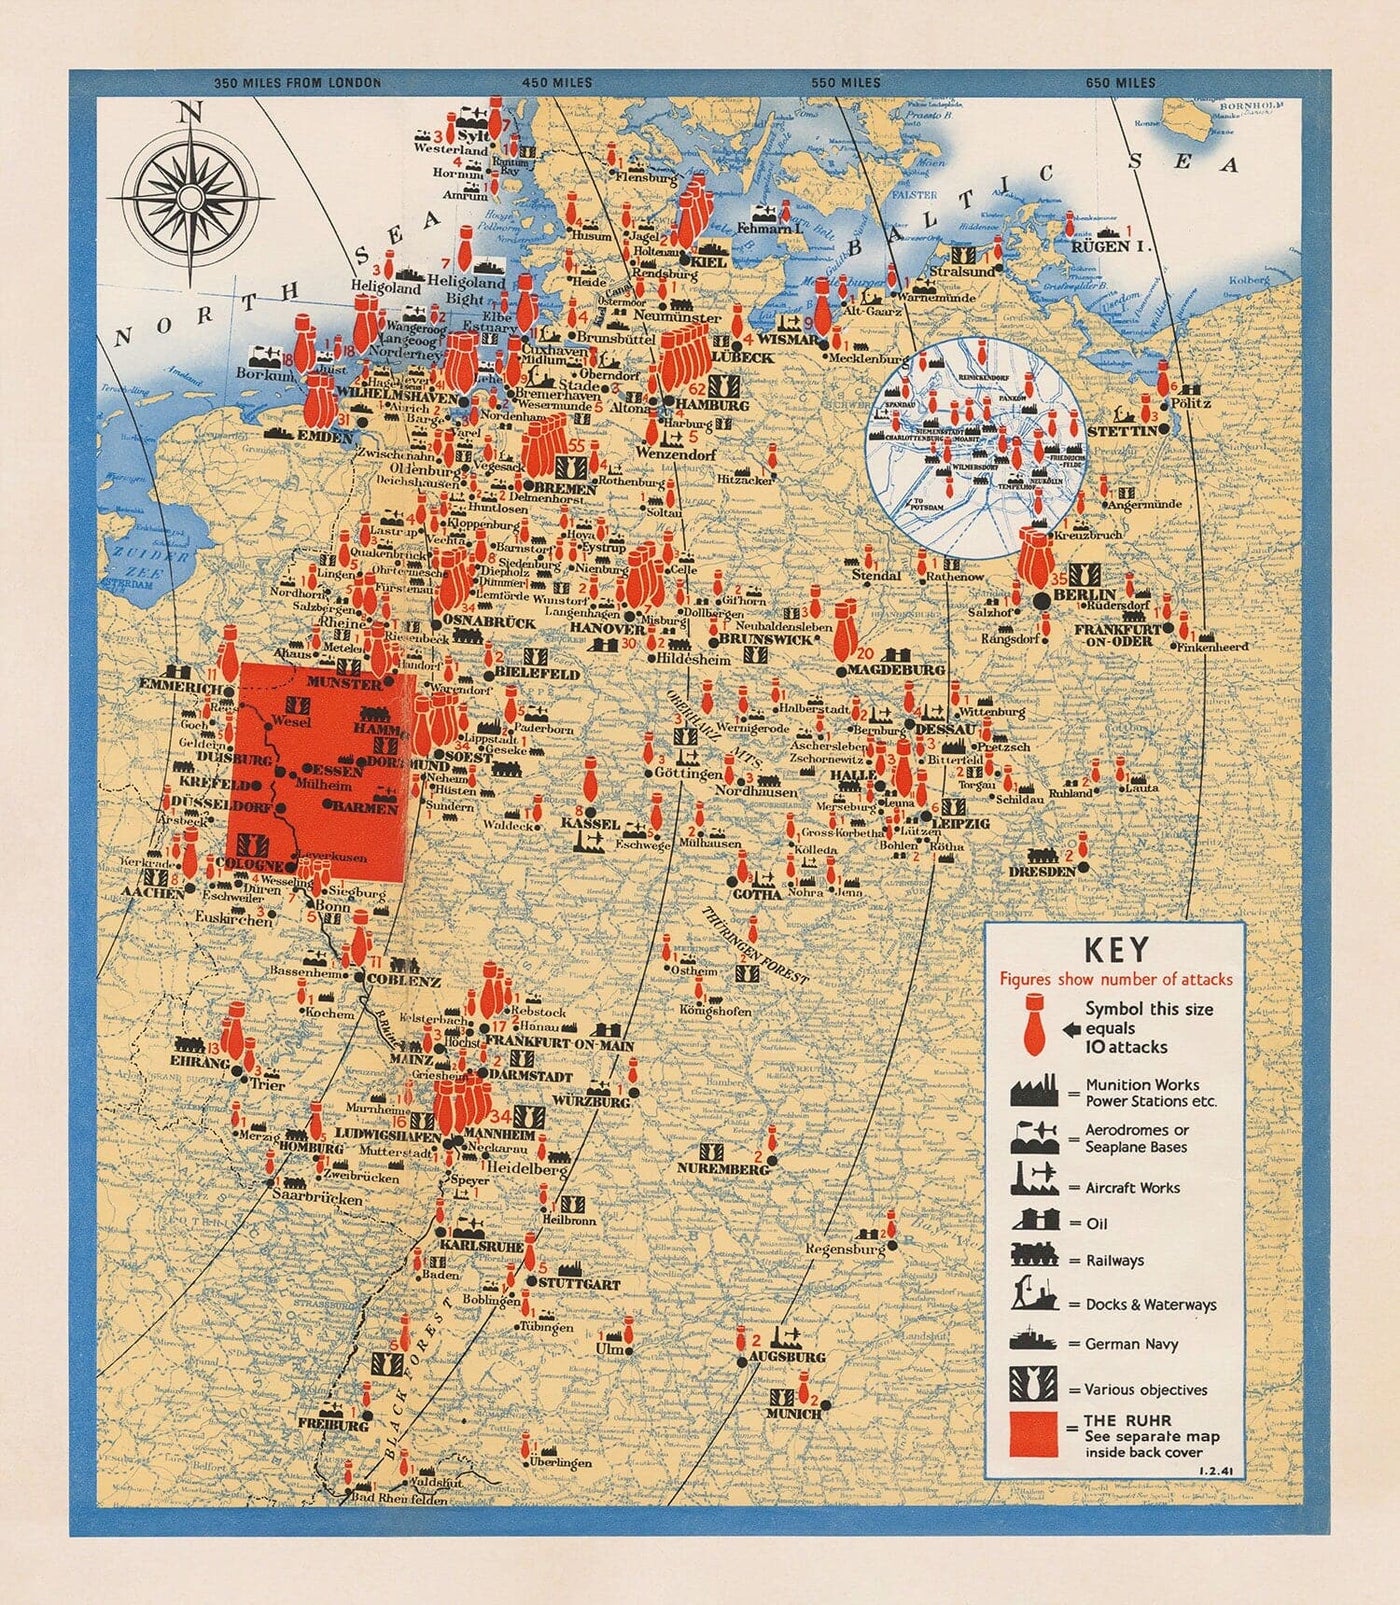 L'offensive aérienne contre l'Allemagne, 1941 - Old WW2 Bombing Map - British RAF & Air Ministry Propaganda